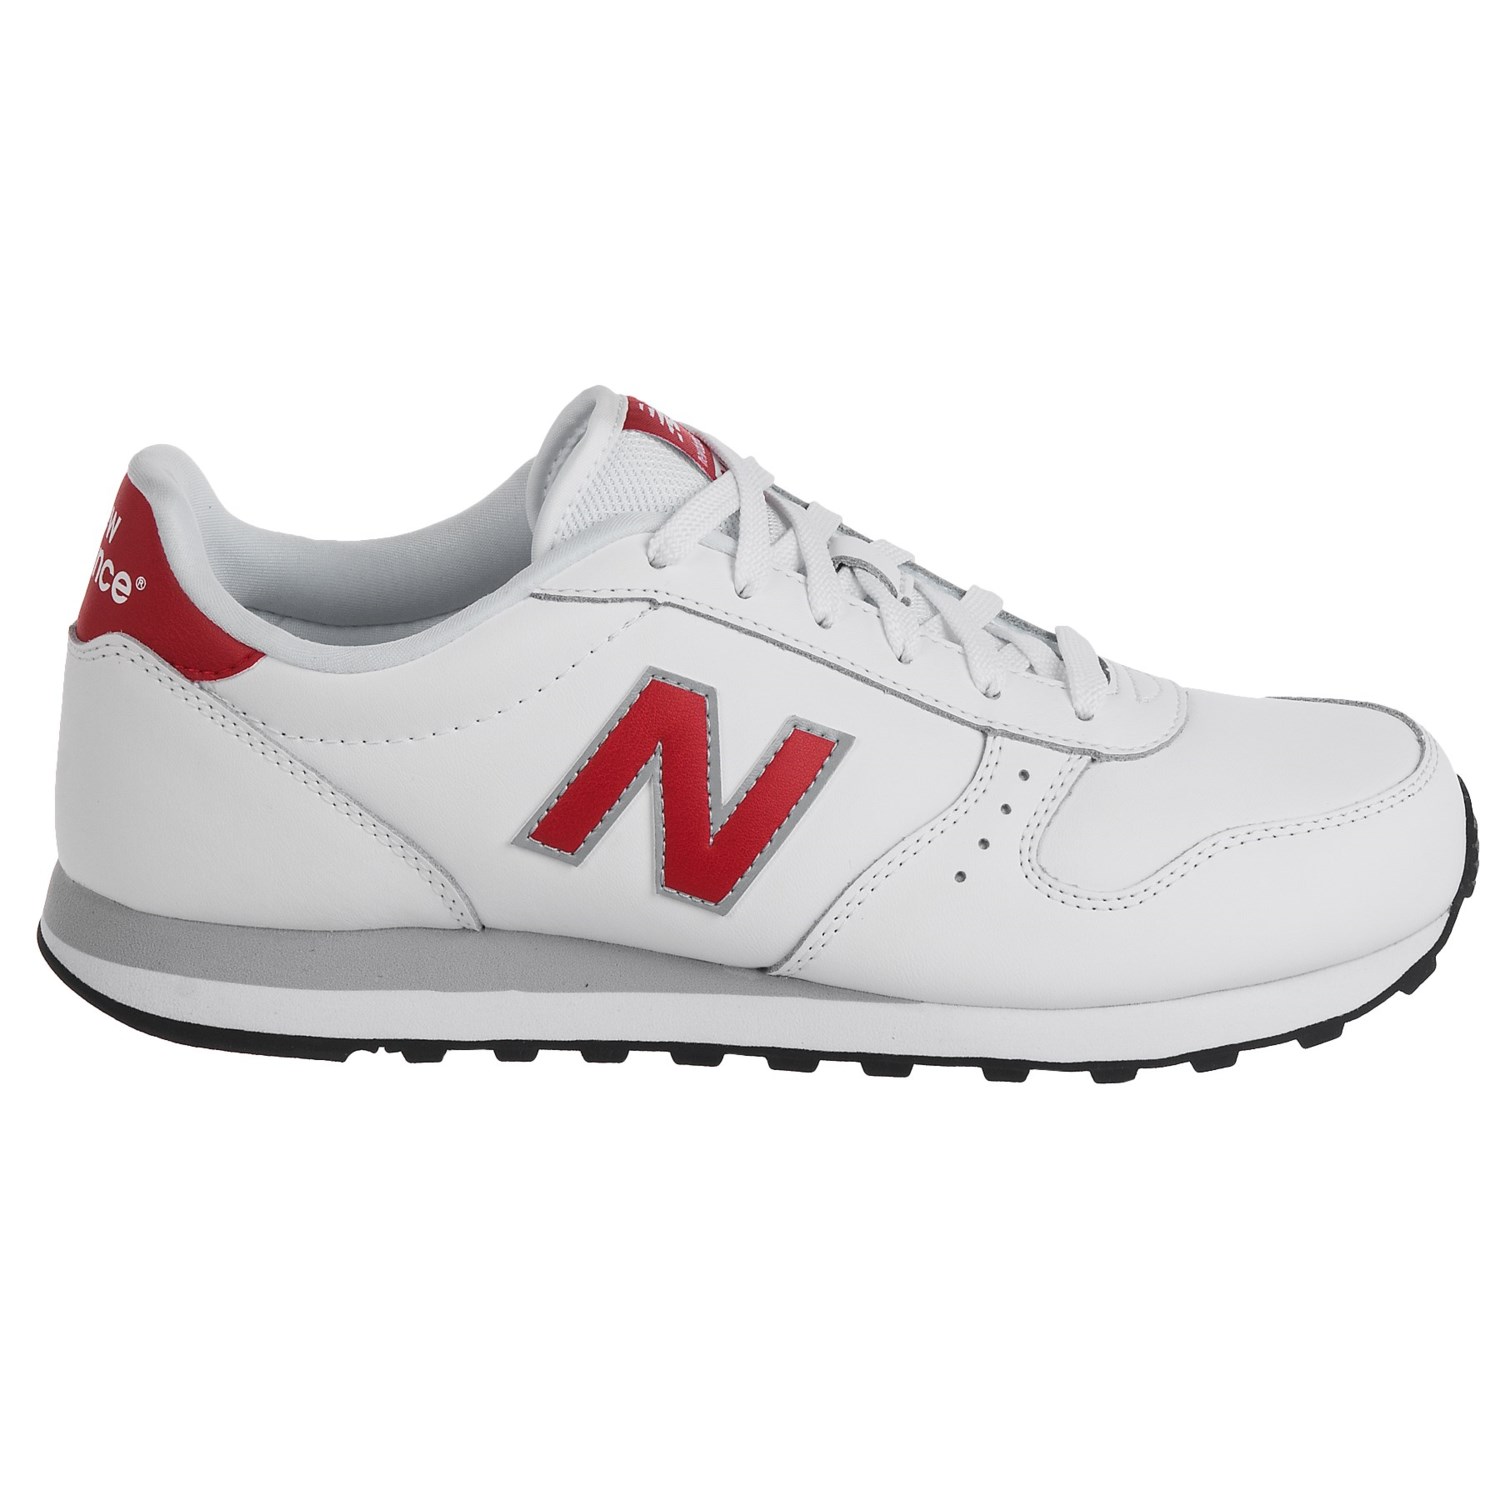 New Balance Classic 311 Sneakers (For Men) - Save 46%